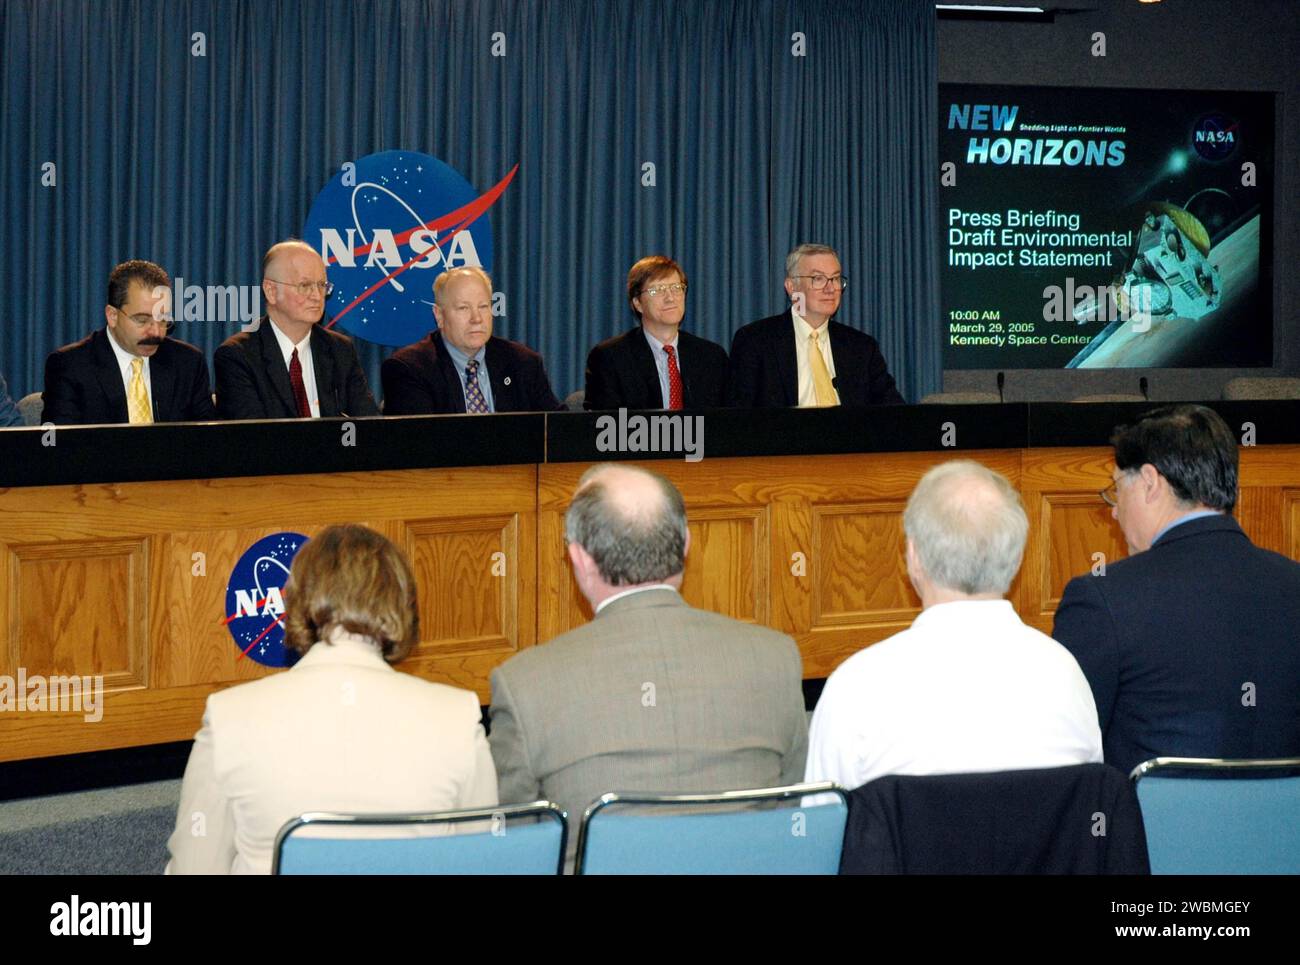 KENNEDY SPACE CENTER, FLA. - Representatives of NASA’s New Horizons Mission to Pluto discuss the mission during a press briefing on the Draft environmental Impact Statement at NASA’s Kennedy Space Center. From left are Orlando Figueroa, deputy association administrator for Programs, Science Mission Directorate; Earl Wahlquist, associate director for Space and Defense Power Systems, Department of Energy, in Germantown, Md.; Kurt Lindstrom, New Horizons Program executive, with NASA; Hal Weaver, New Horizons Project scientist, Johns Hopkins University Applied Physics Laboratory in Laurel, Md.; an Stock Photo